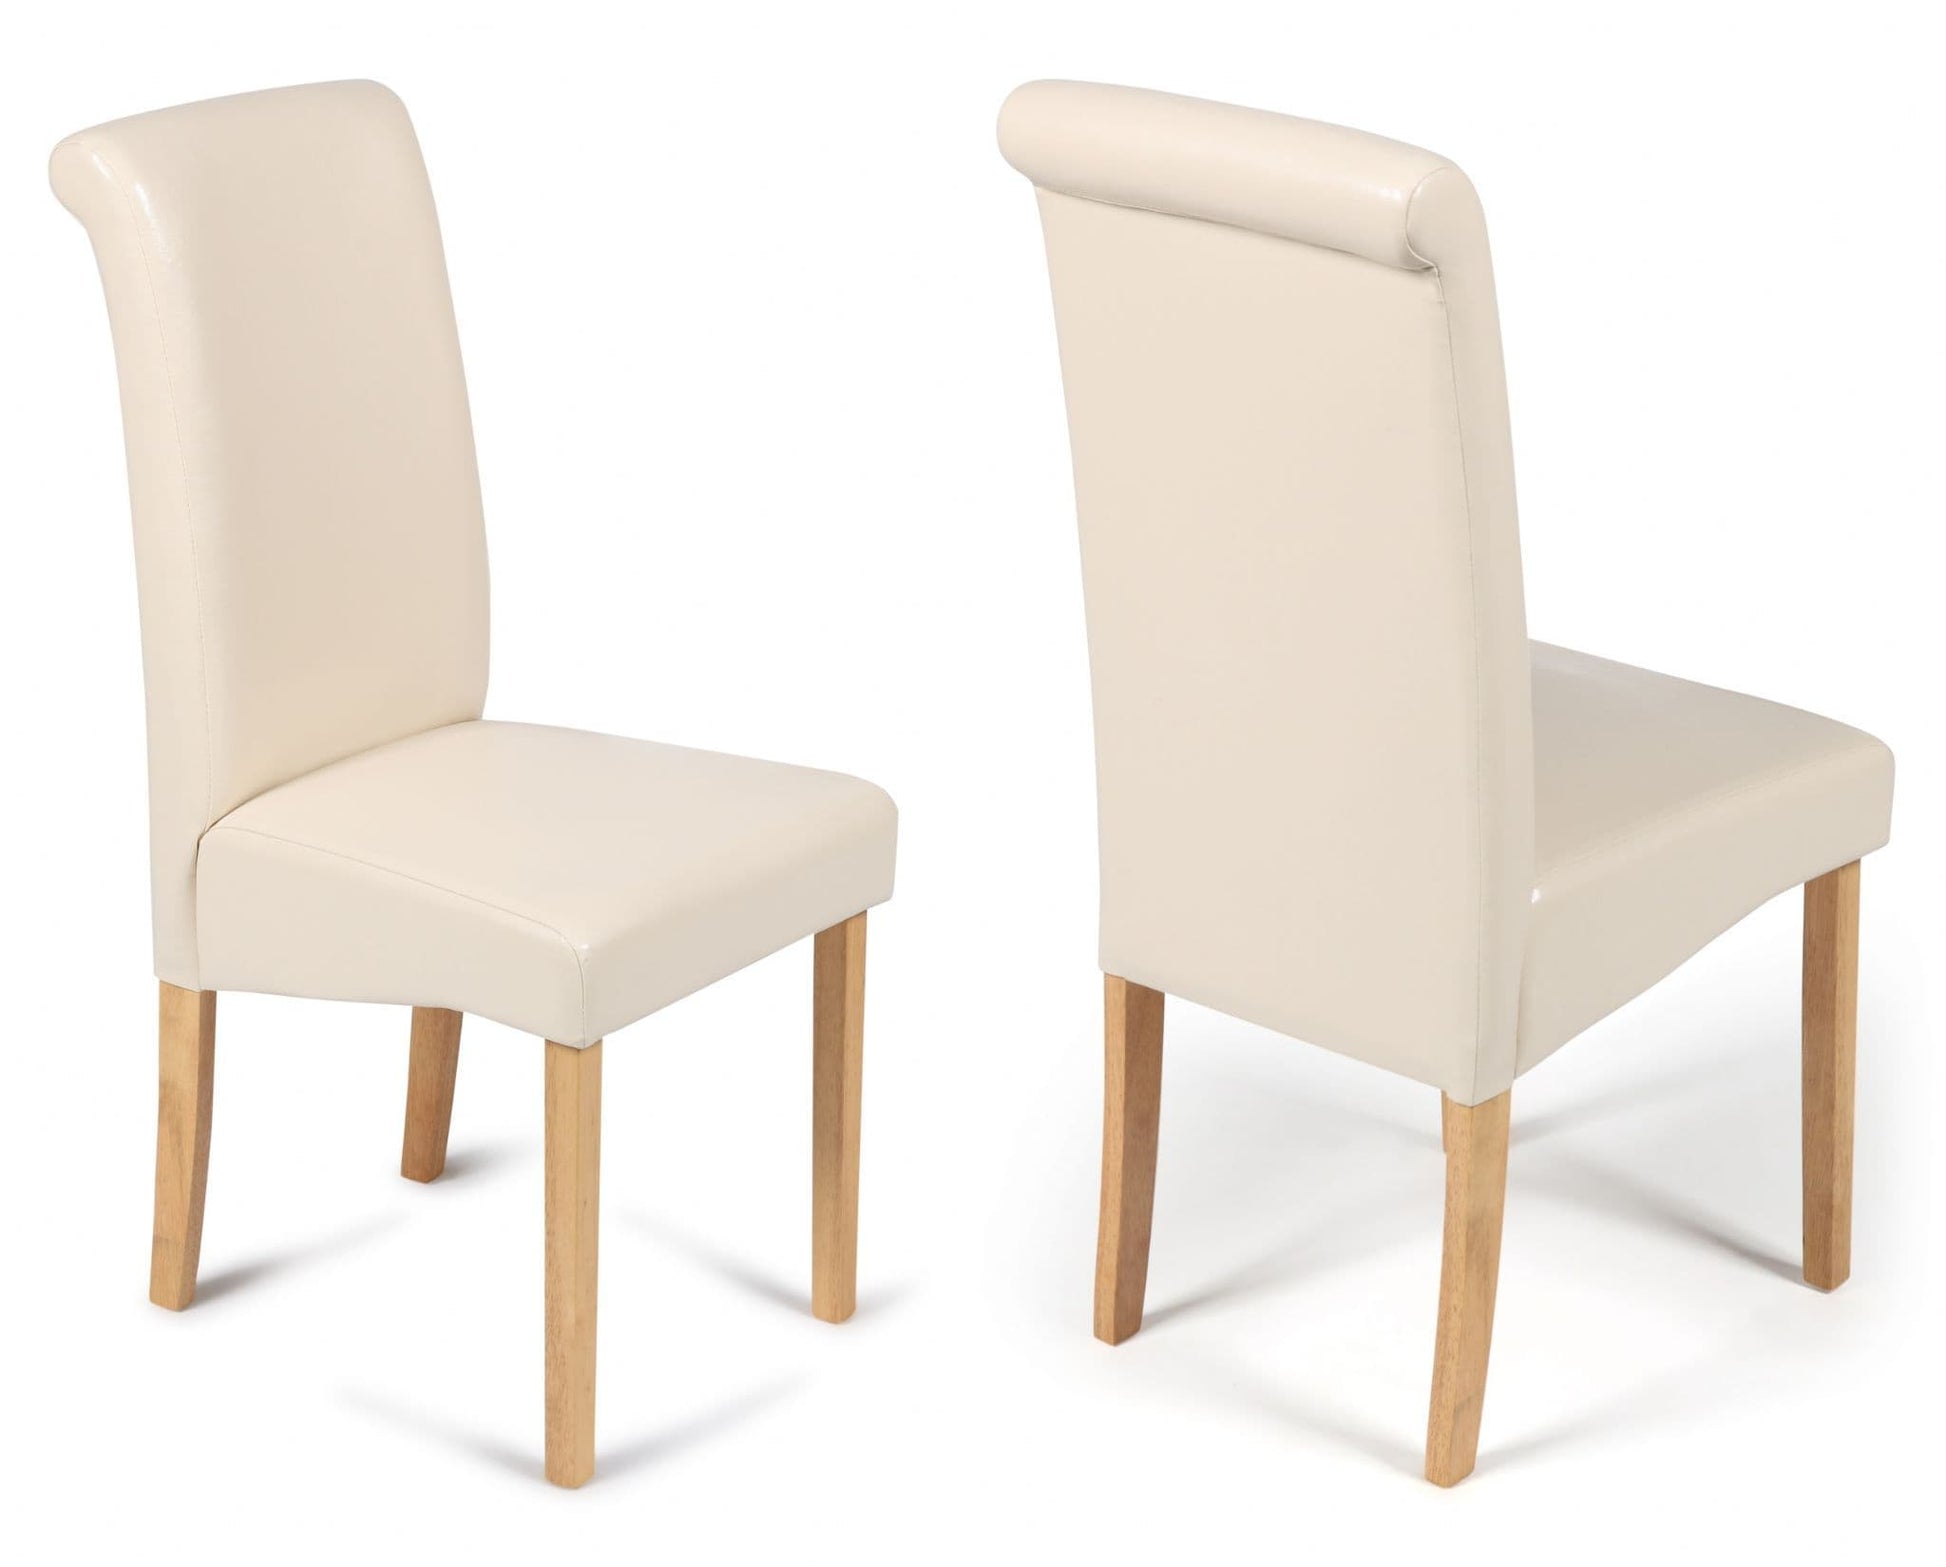 2 Roma Cream Faux Leather Dining Chairs - SKU SH-ROMA-CR2 – EAN 0799422555570